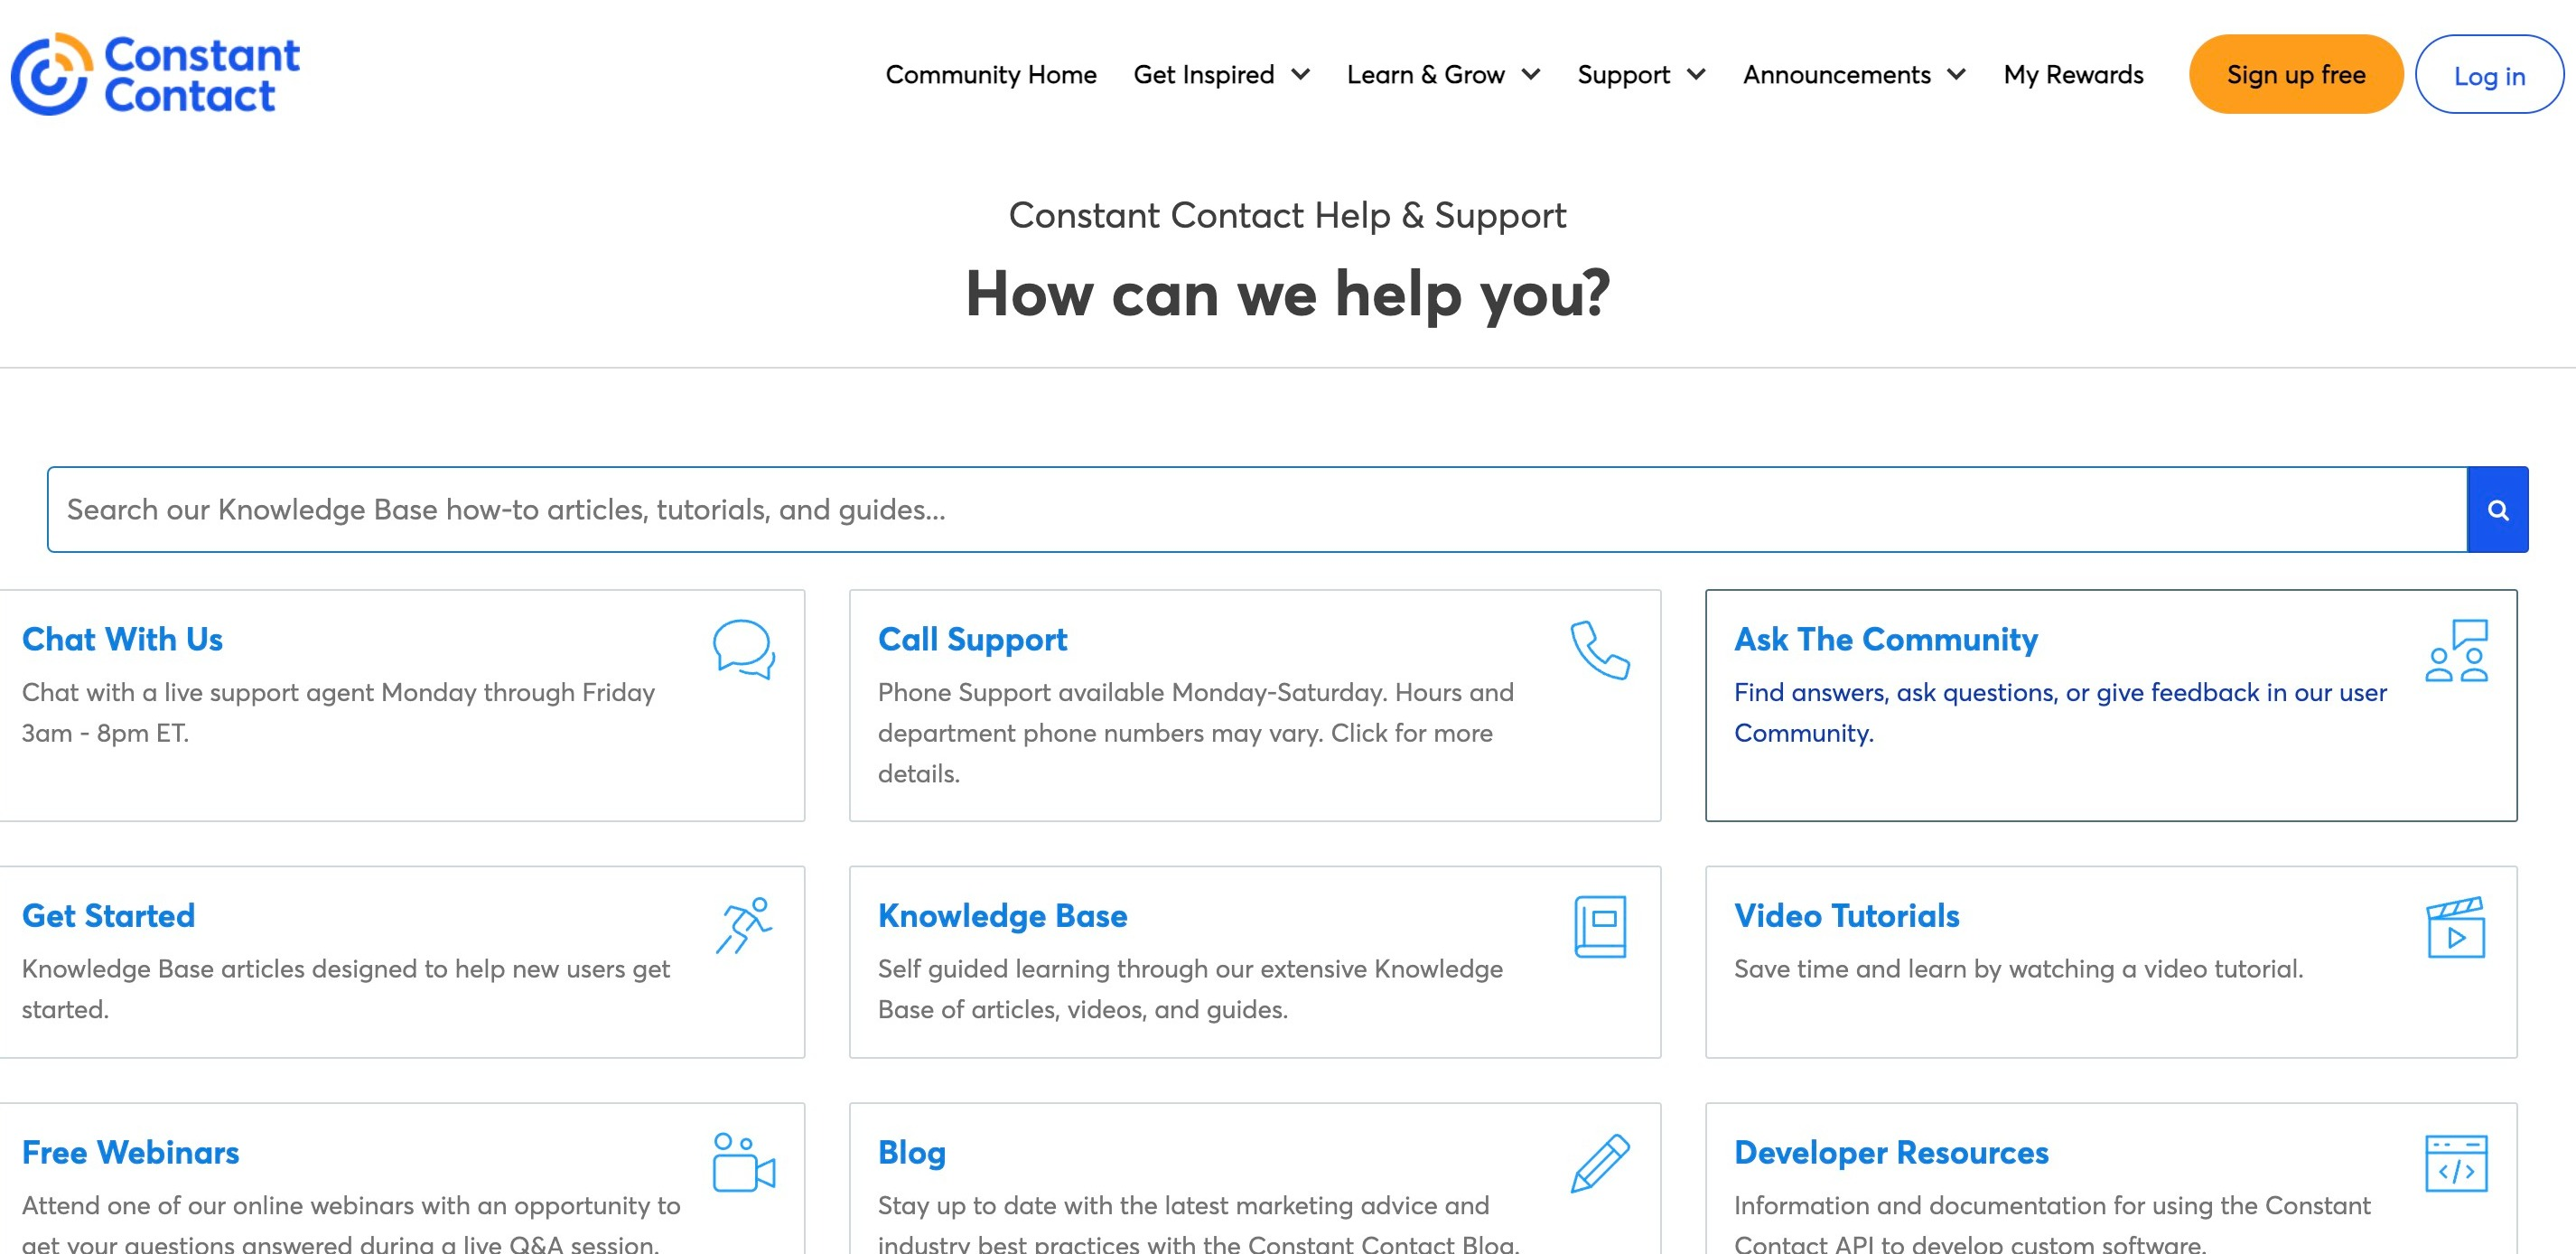 Constant Contact's Support page